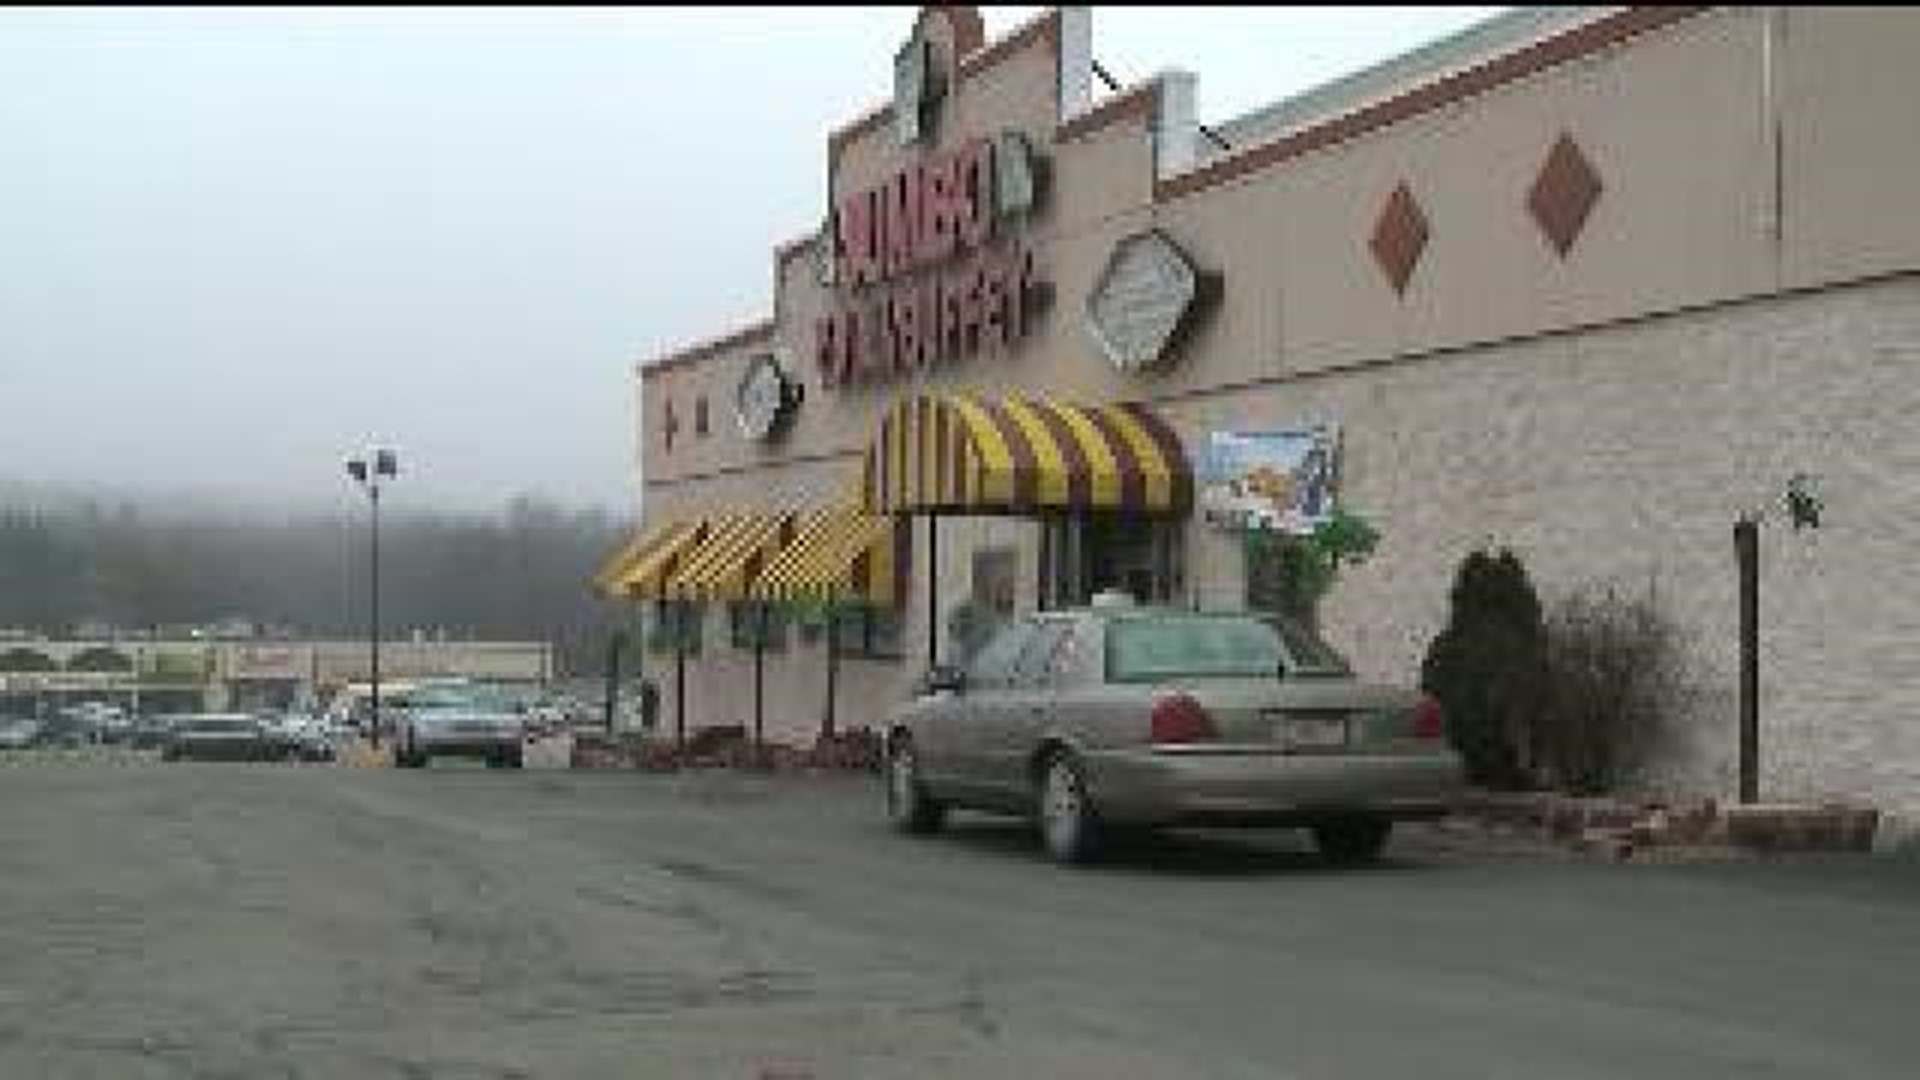 Chinese Buffet Waiter Accused of Scamming Customers